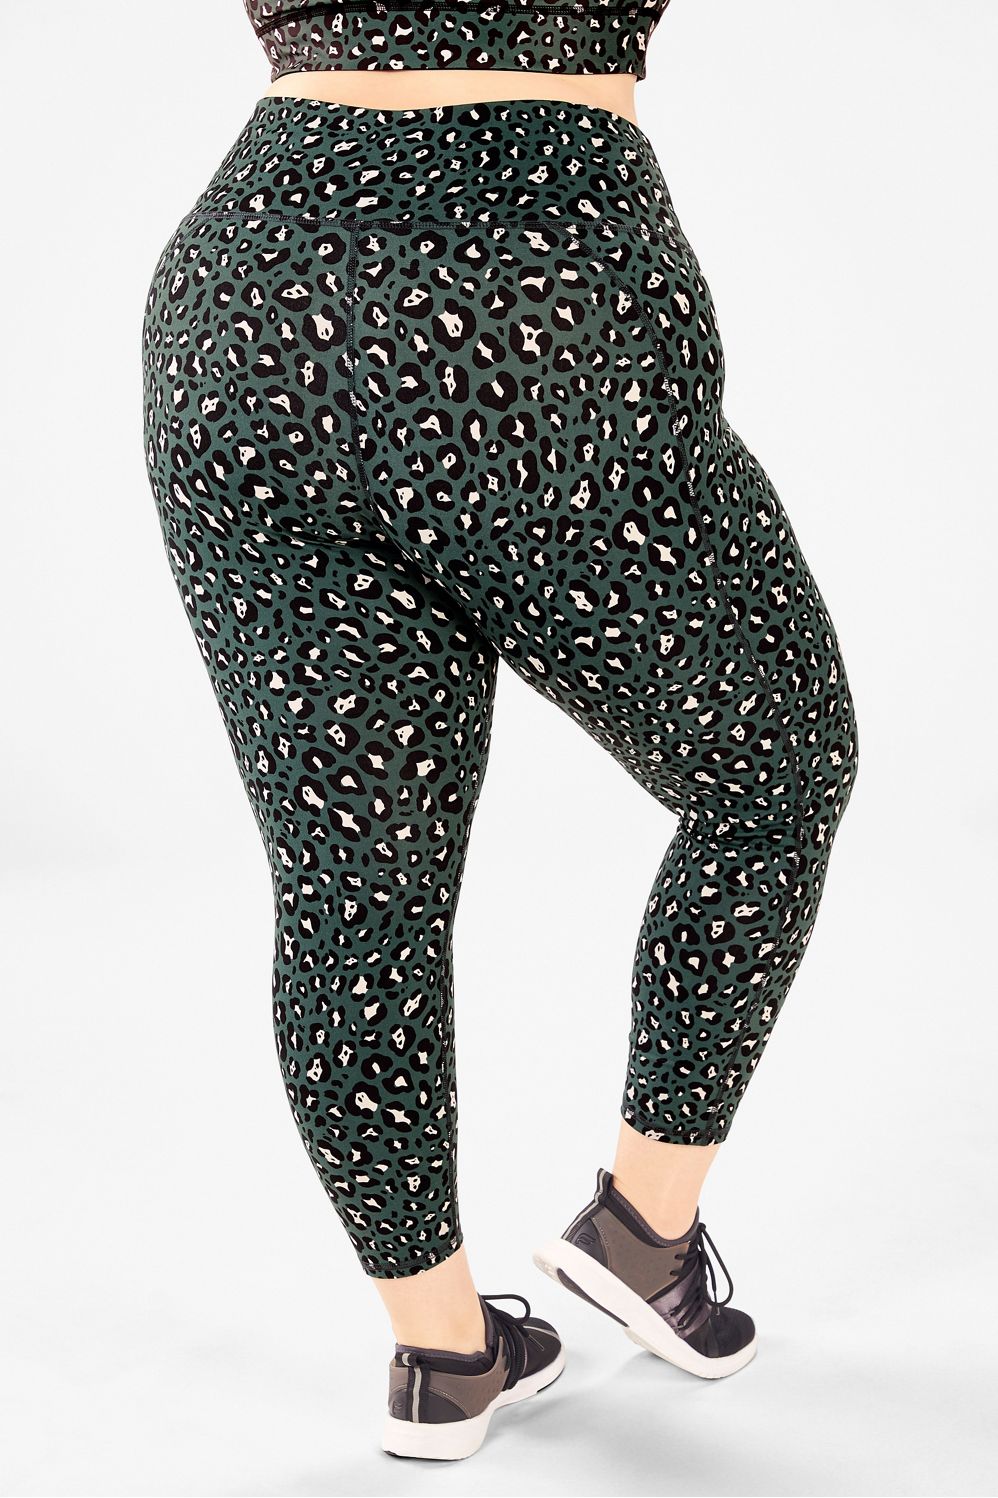 BEST FABLETICS LEGGING / ON-THE-GO LEOPARD PRINT HIGH WAISTED LEGGING TRY  ON REVIEW 